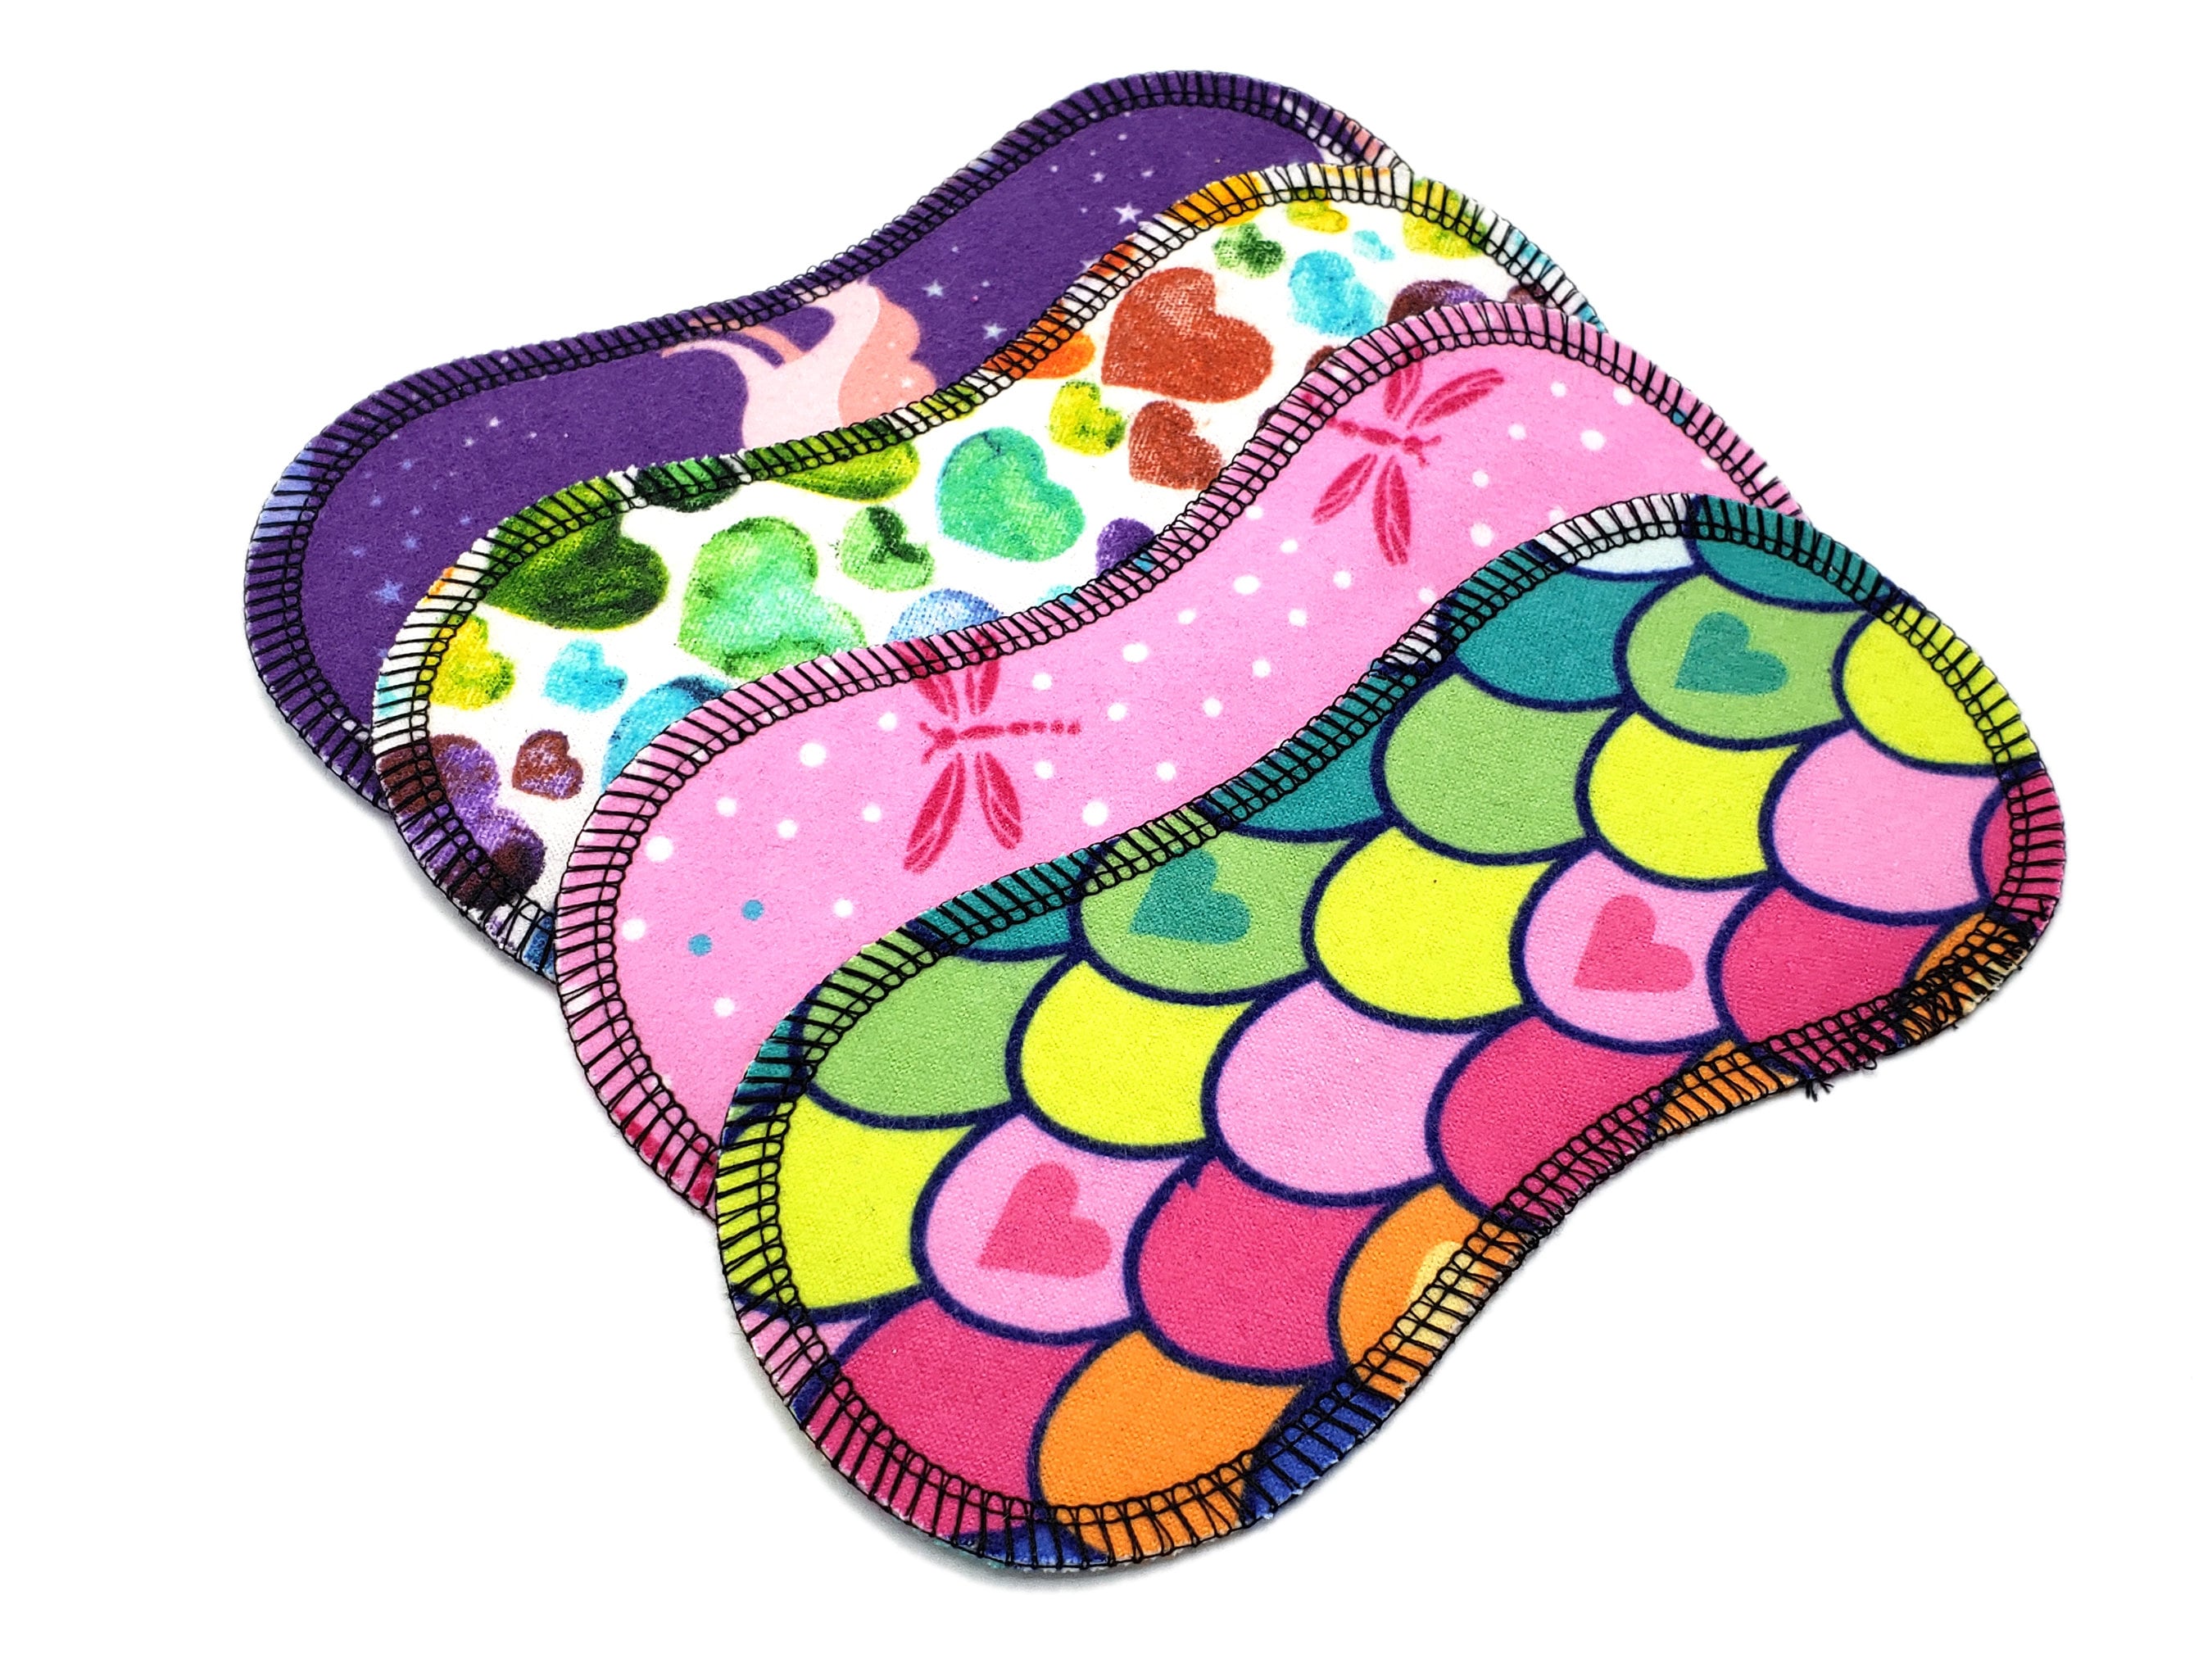 Wingless Panty Liners, Super Soft and Leakproof Cotton Flannel